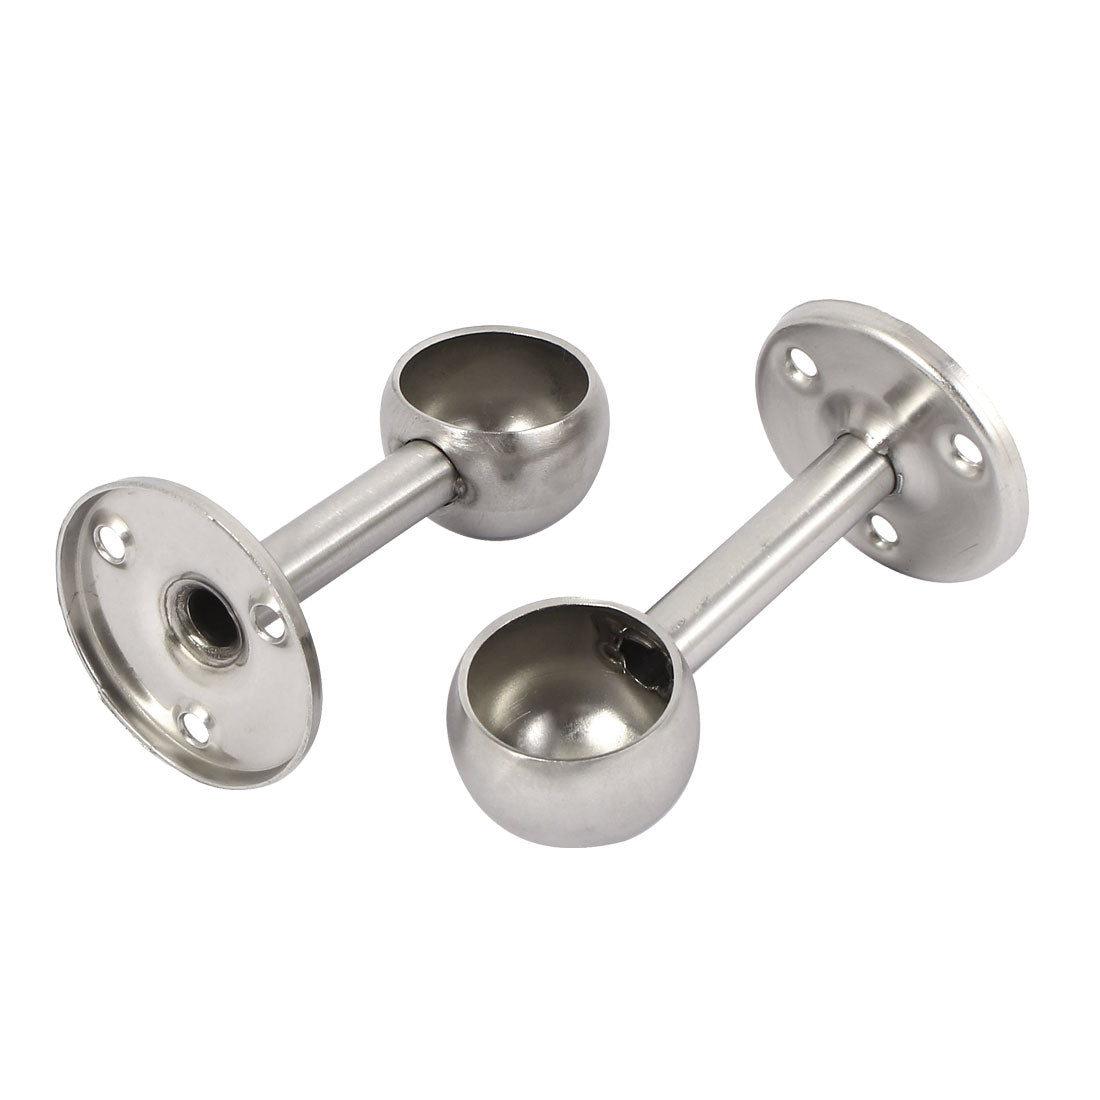 uxcell Uxcell 25mm Dia Stainless Steel Wardrobe Curtain Clothes Rail Lever Support Bracket 2pcs